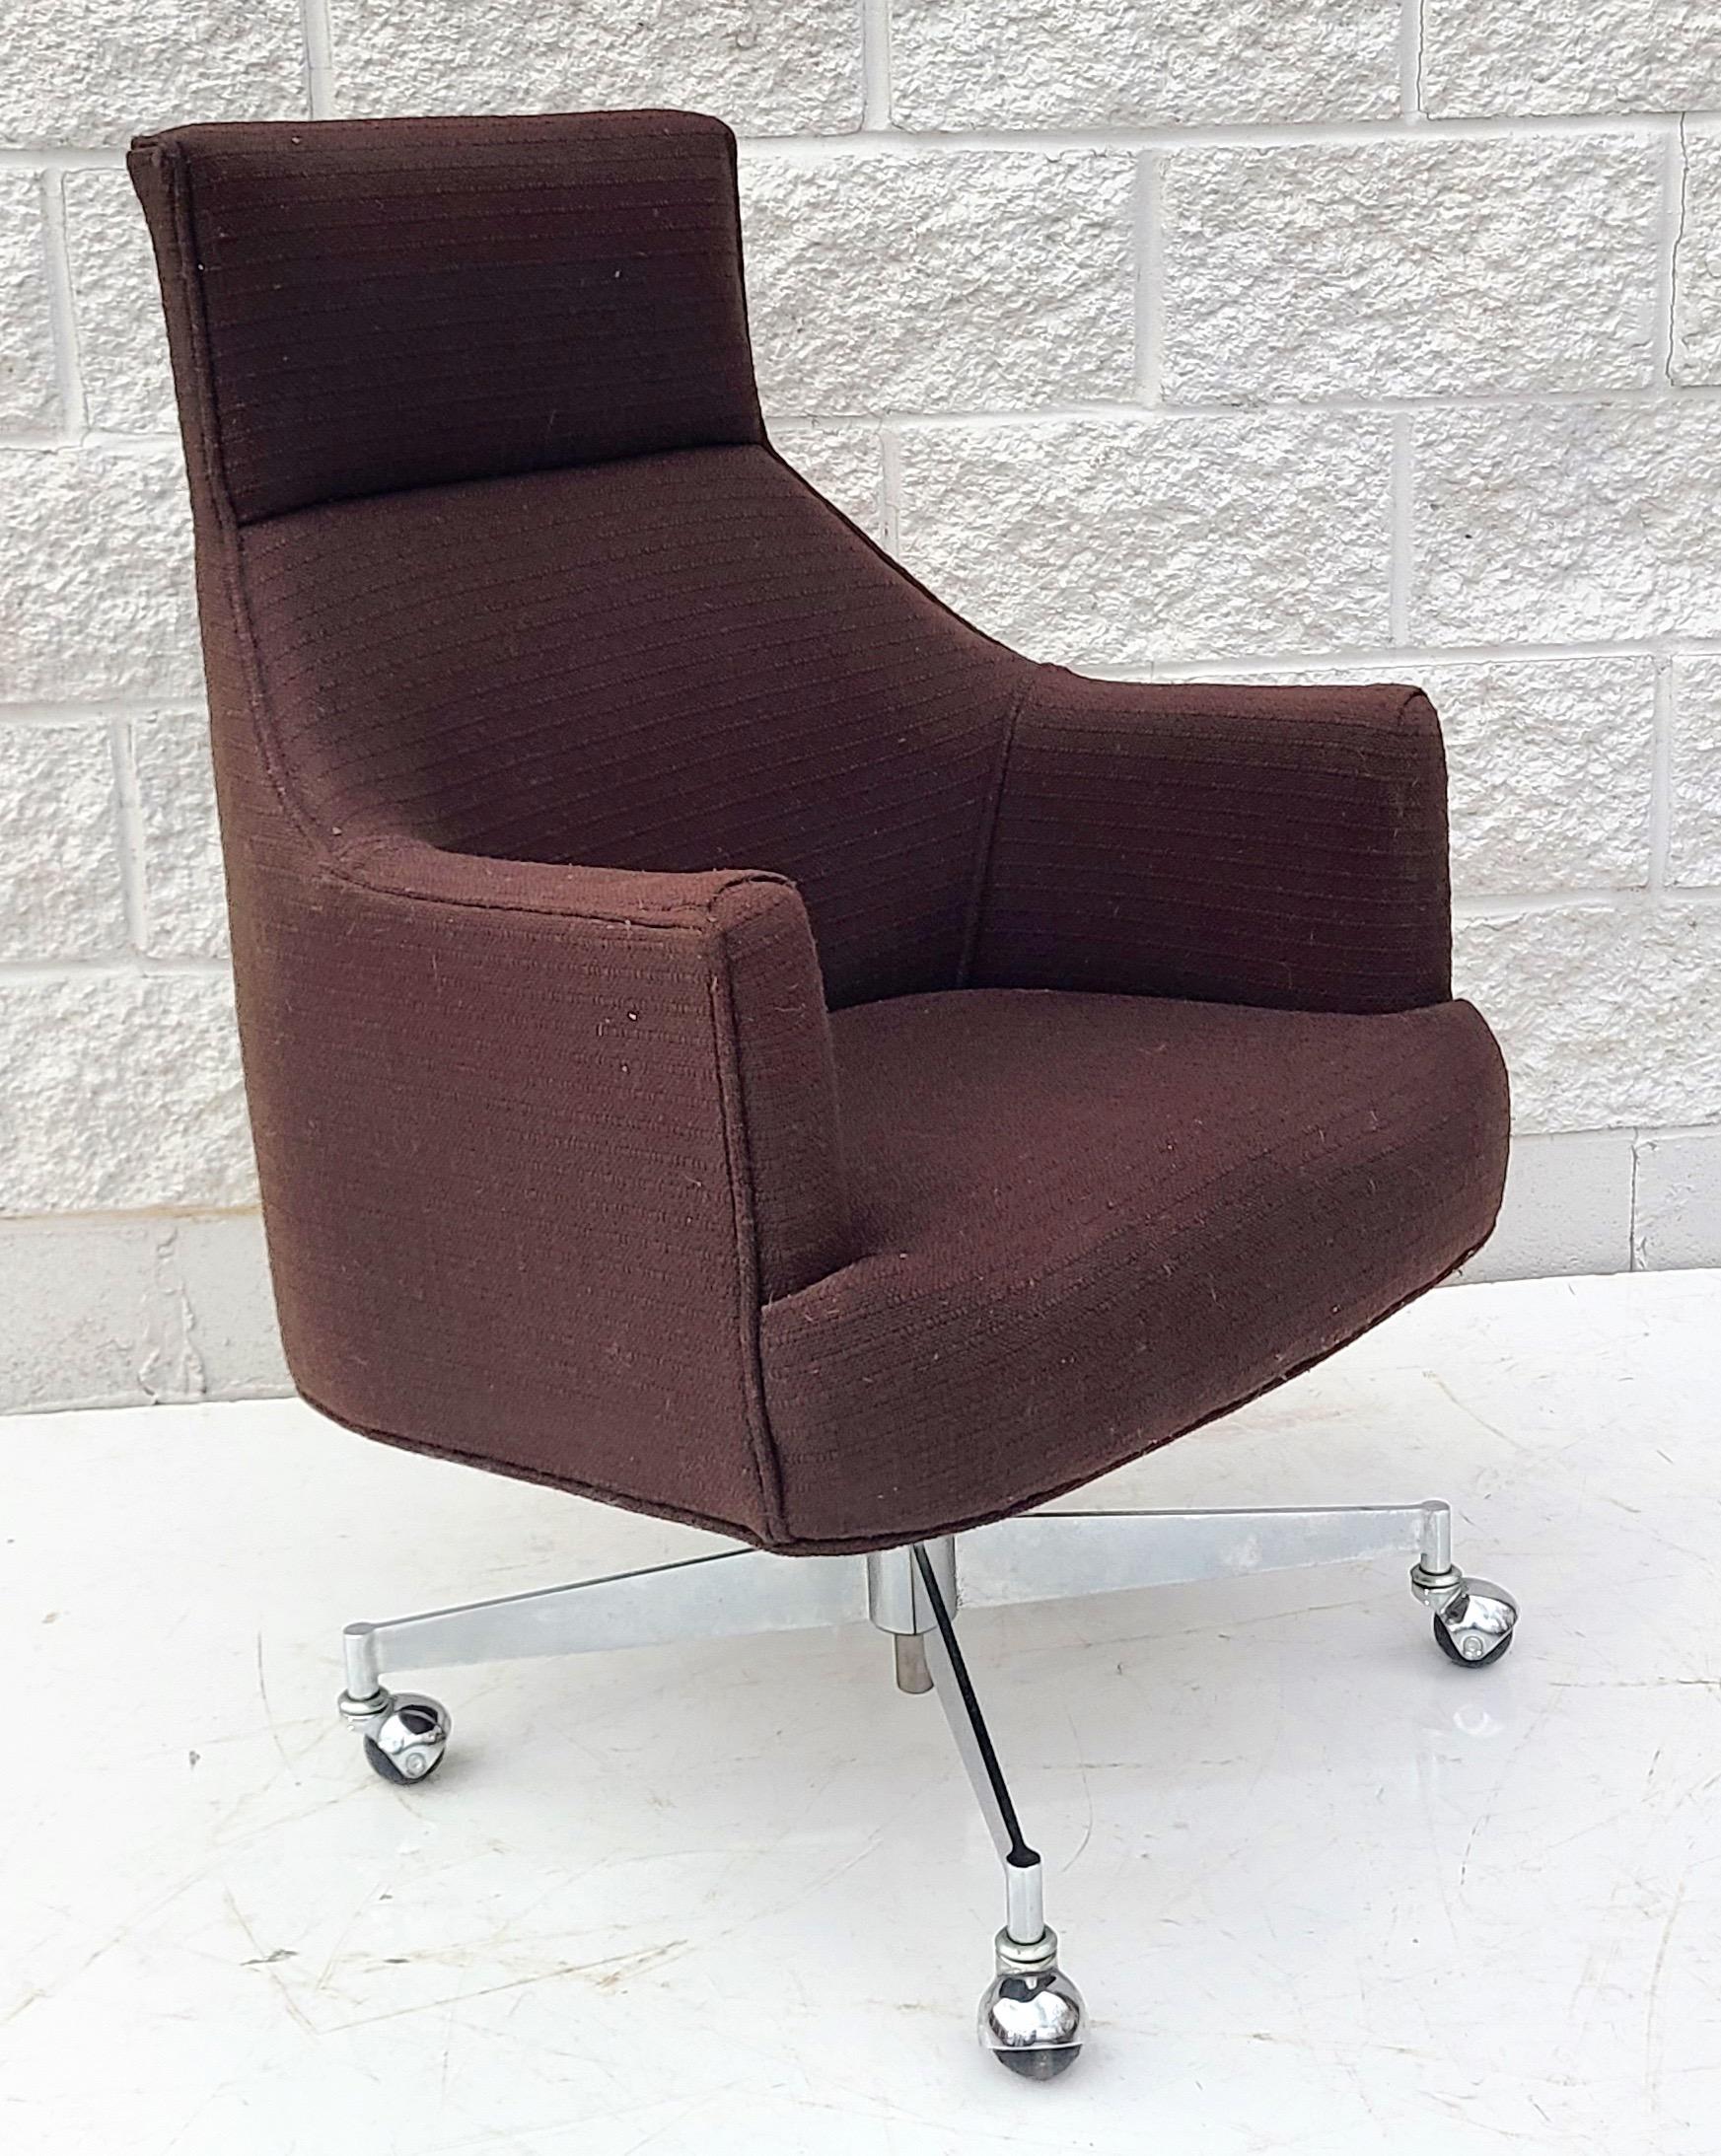 Please reach out for efficient shipping to your location.

Rolling executive chair by Dunbar Furniture Company